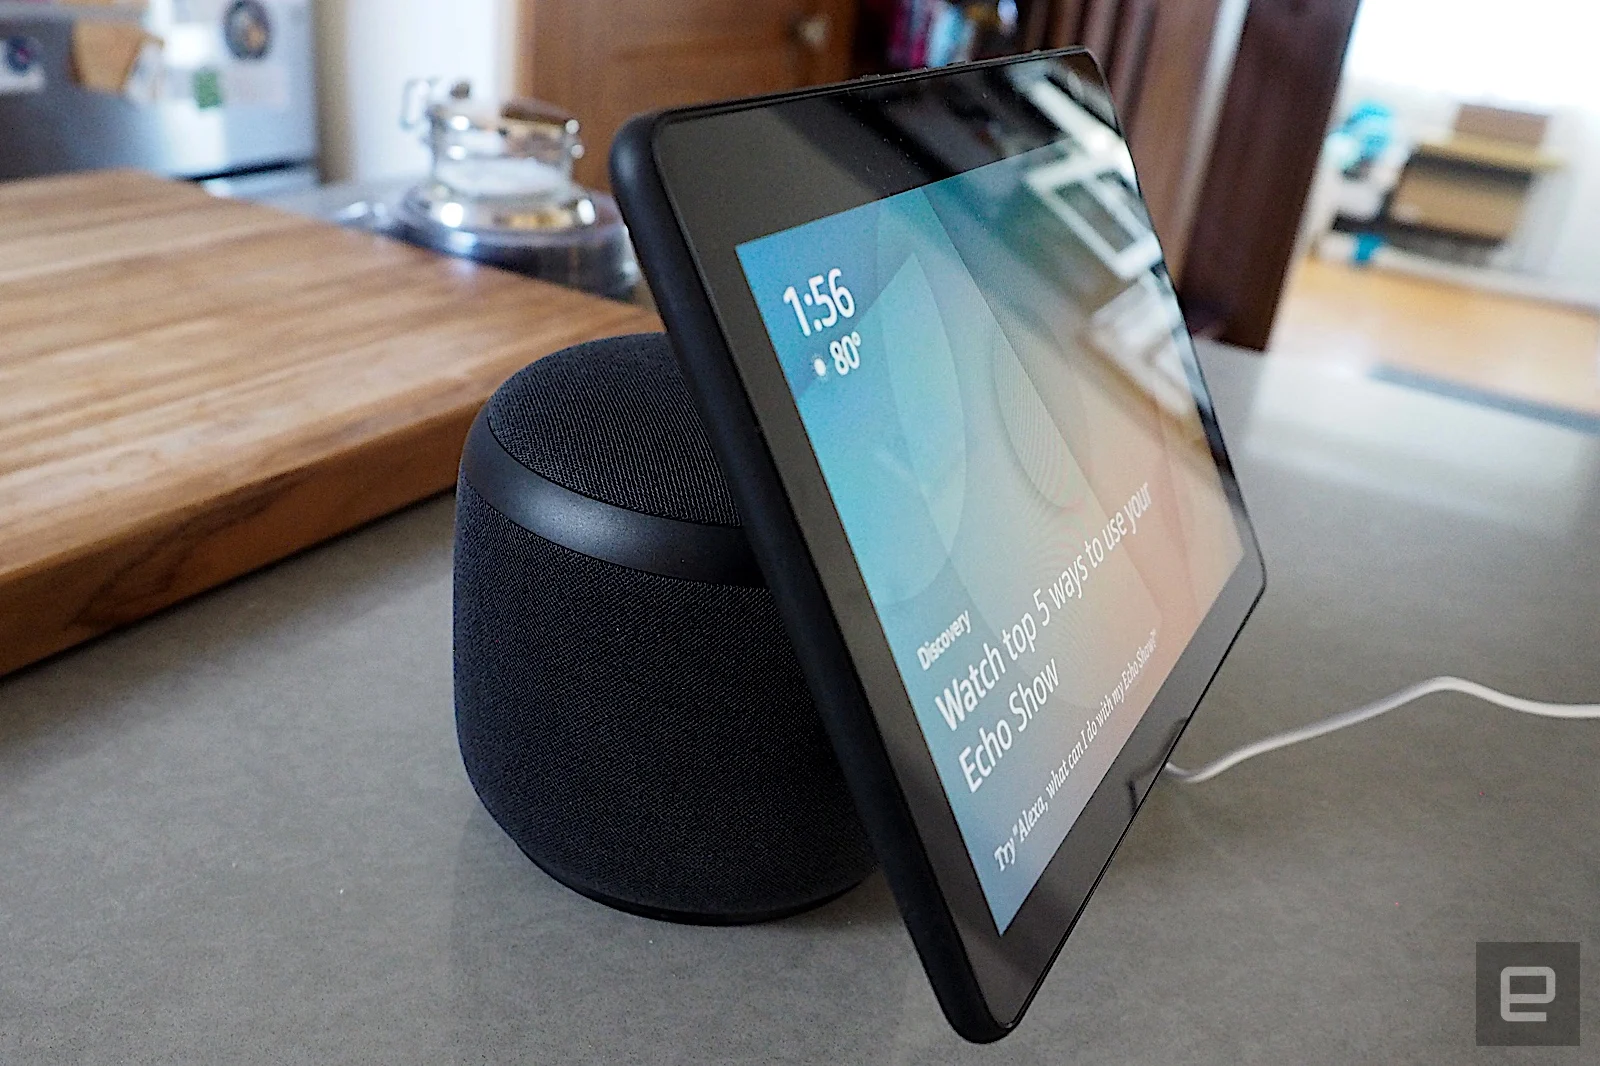 Amazon Echo Show 10 with its screen turned on, sitting on a countertop in front of a wooden cutting board.